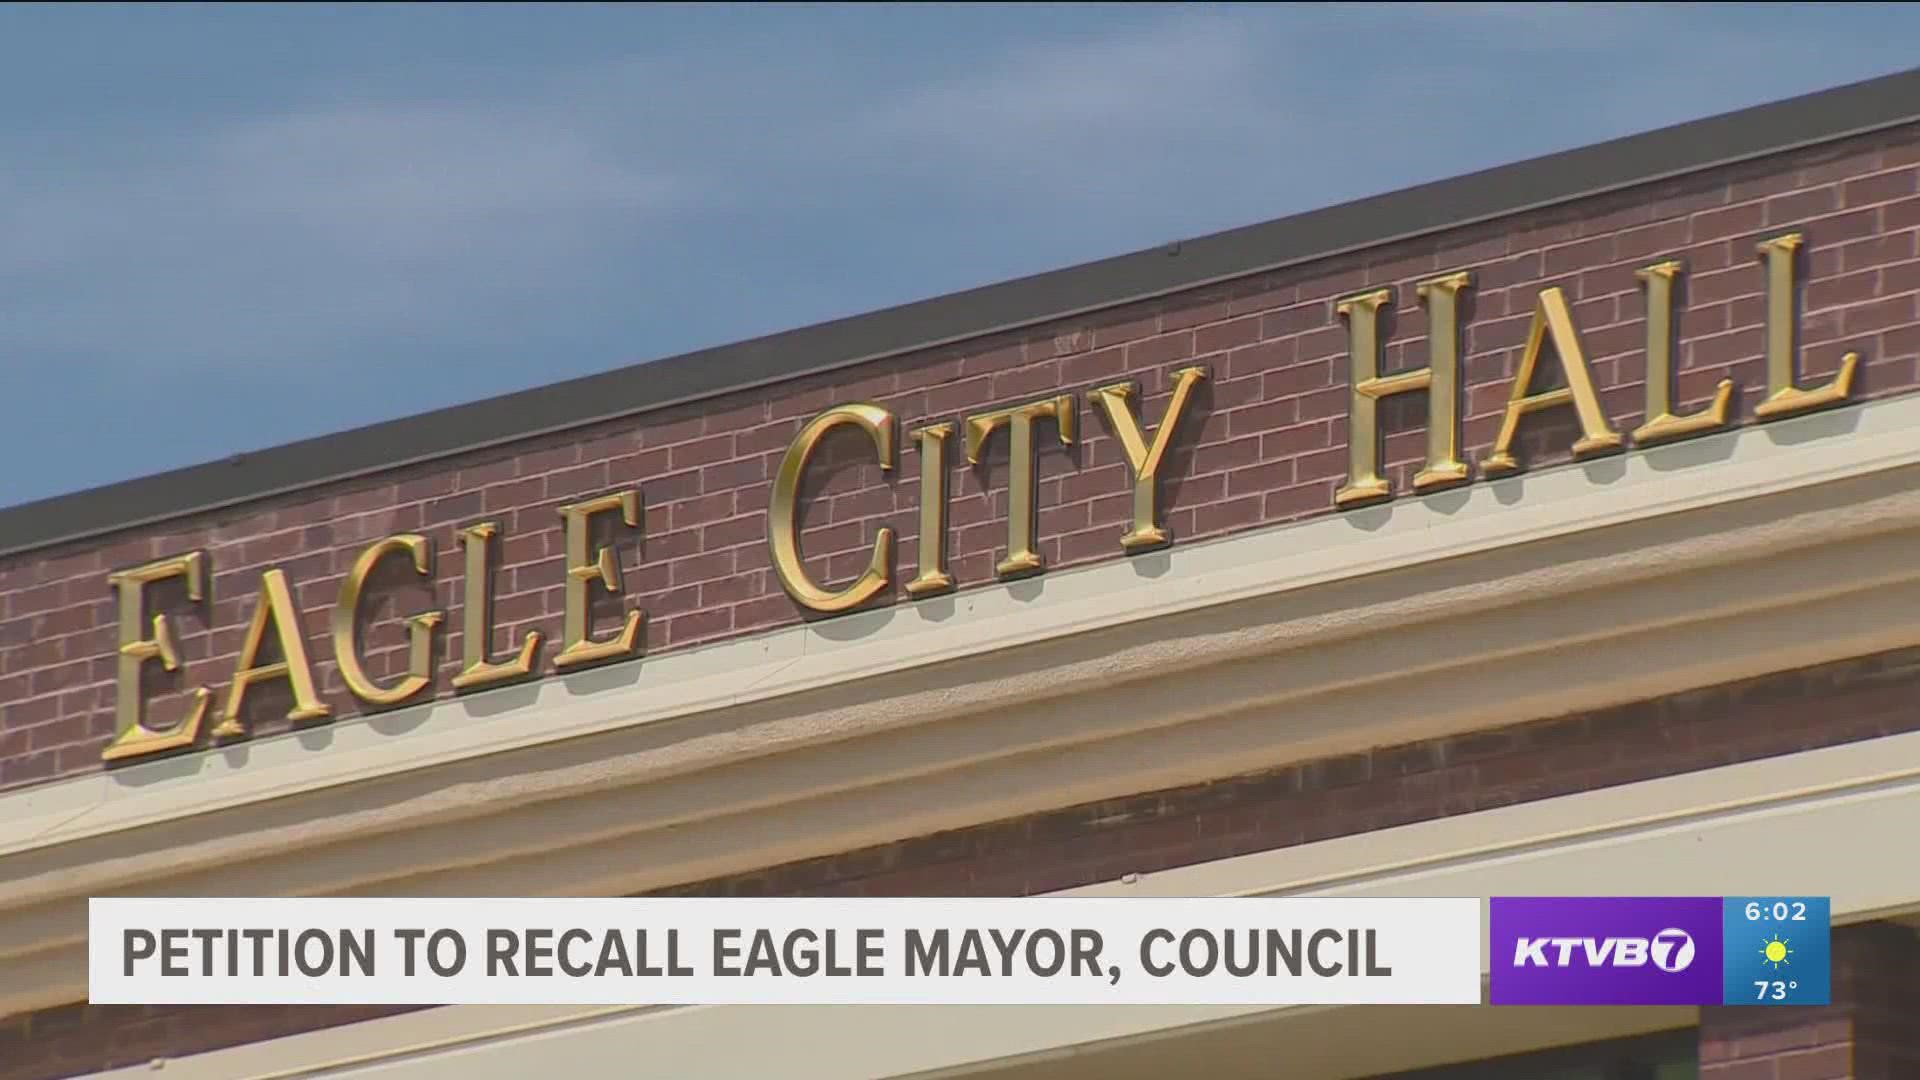 In their petitions, a group says they want Eagle voters to recall the elected officials because they "failed to listen to constituents".